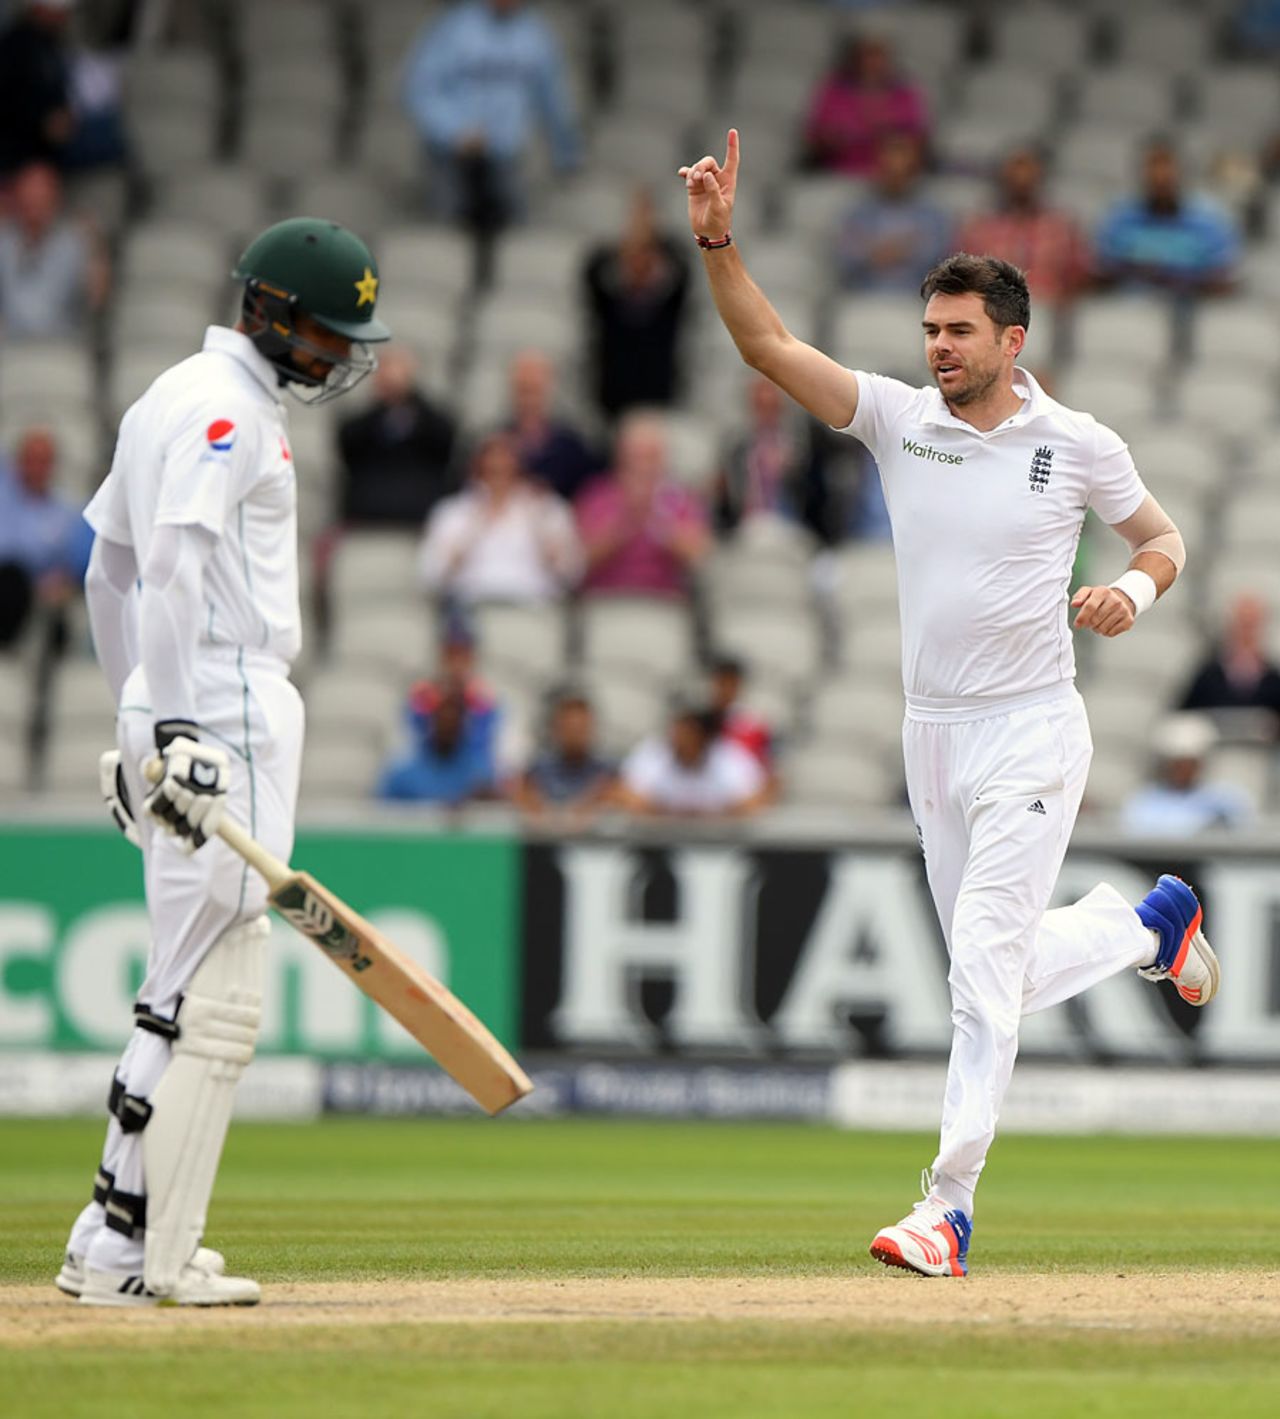 James Anderson removed Shan Masood for the sixth consecutive time, England v Pakistan, 2nd Investec Test, Old Trafford, 4th day, July 25, 2016